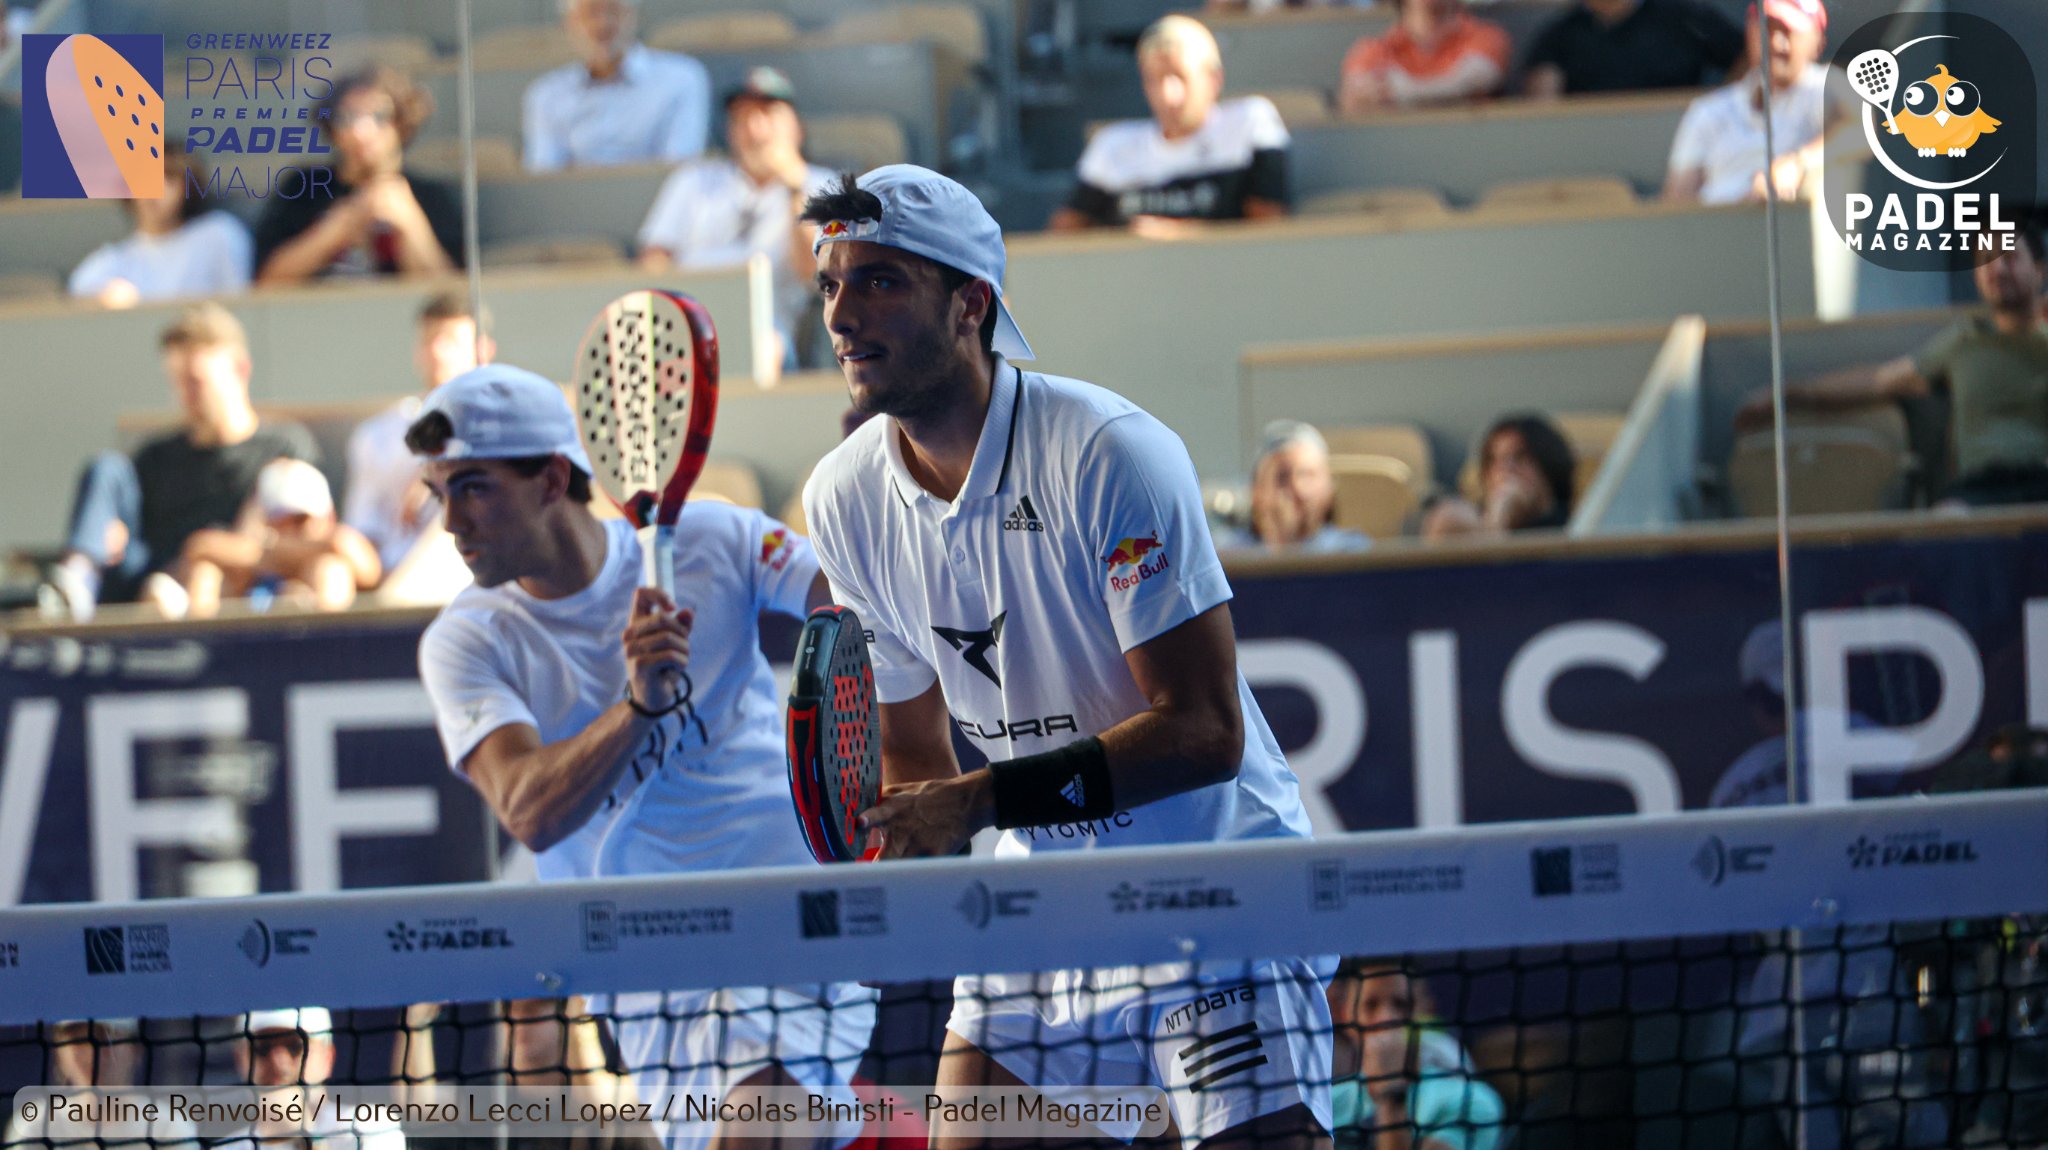 Premier Padel – Lebron and Galan ready for their third consecutive final